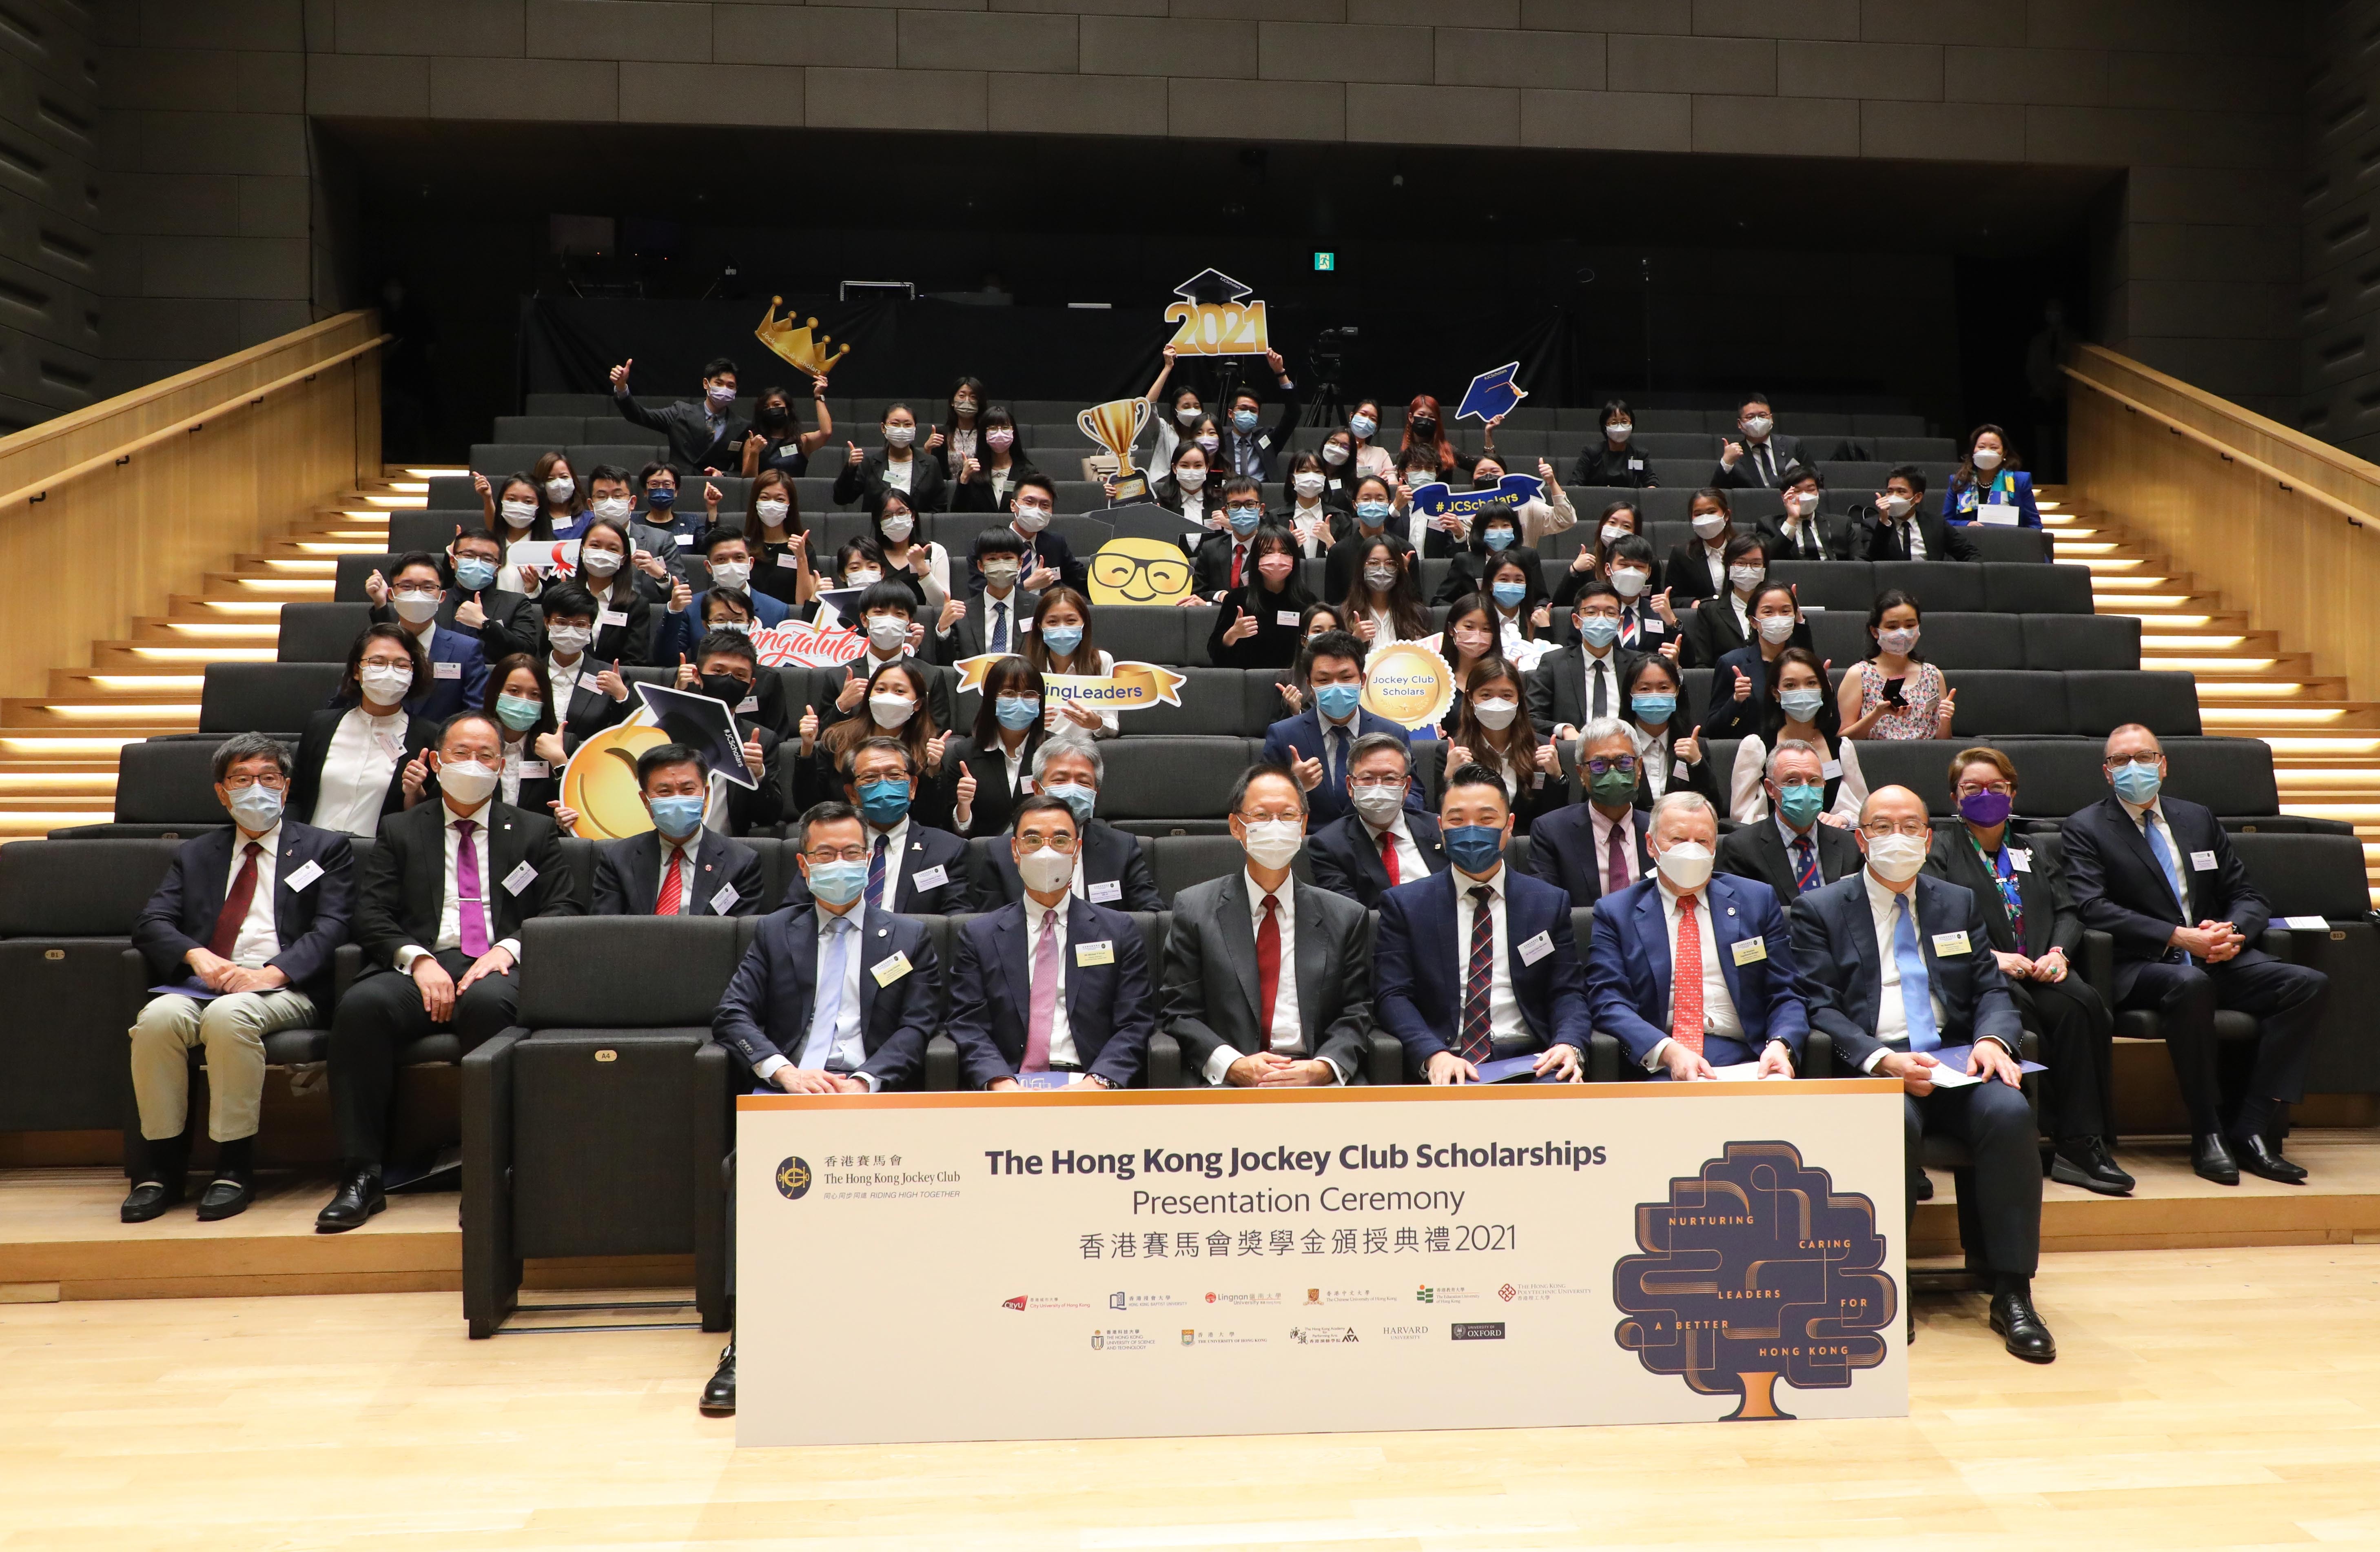 Pictured with Jockey Club Scholars are Club Chairman Philip Chen (front row, 3rd left); Guest of Honour Daniel Chan (front row, 3rd right), Badminton Men’s Singles WH2 Bronze Medallist at the Tokyo 2020 Paralympic Games; Club Deputy Chairman Michael Lee (front row, 2nd left); Chief Executive Officer Winfried Engelbrecht-Bresges (front row, 2nd right); Executive Director, Charities and Community, Leong Cheung (front row, 1st left); Executive Director, Corporate Affairs, Raymond Tam (front row, 1st right), and representatives from participating tertiary institutions.
